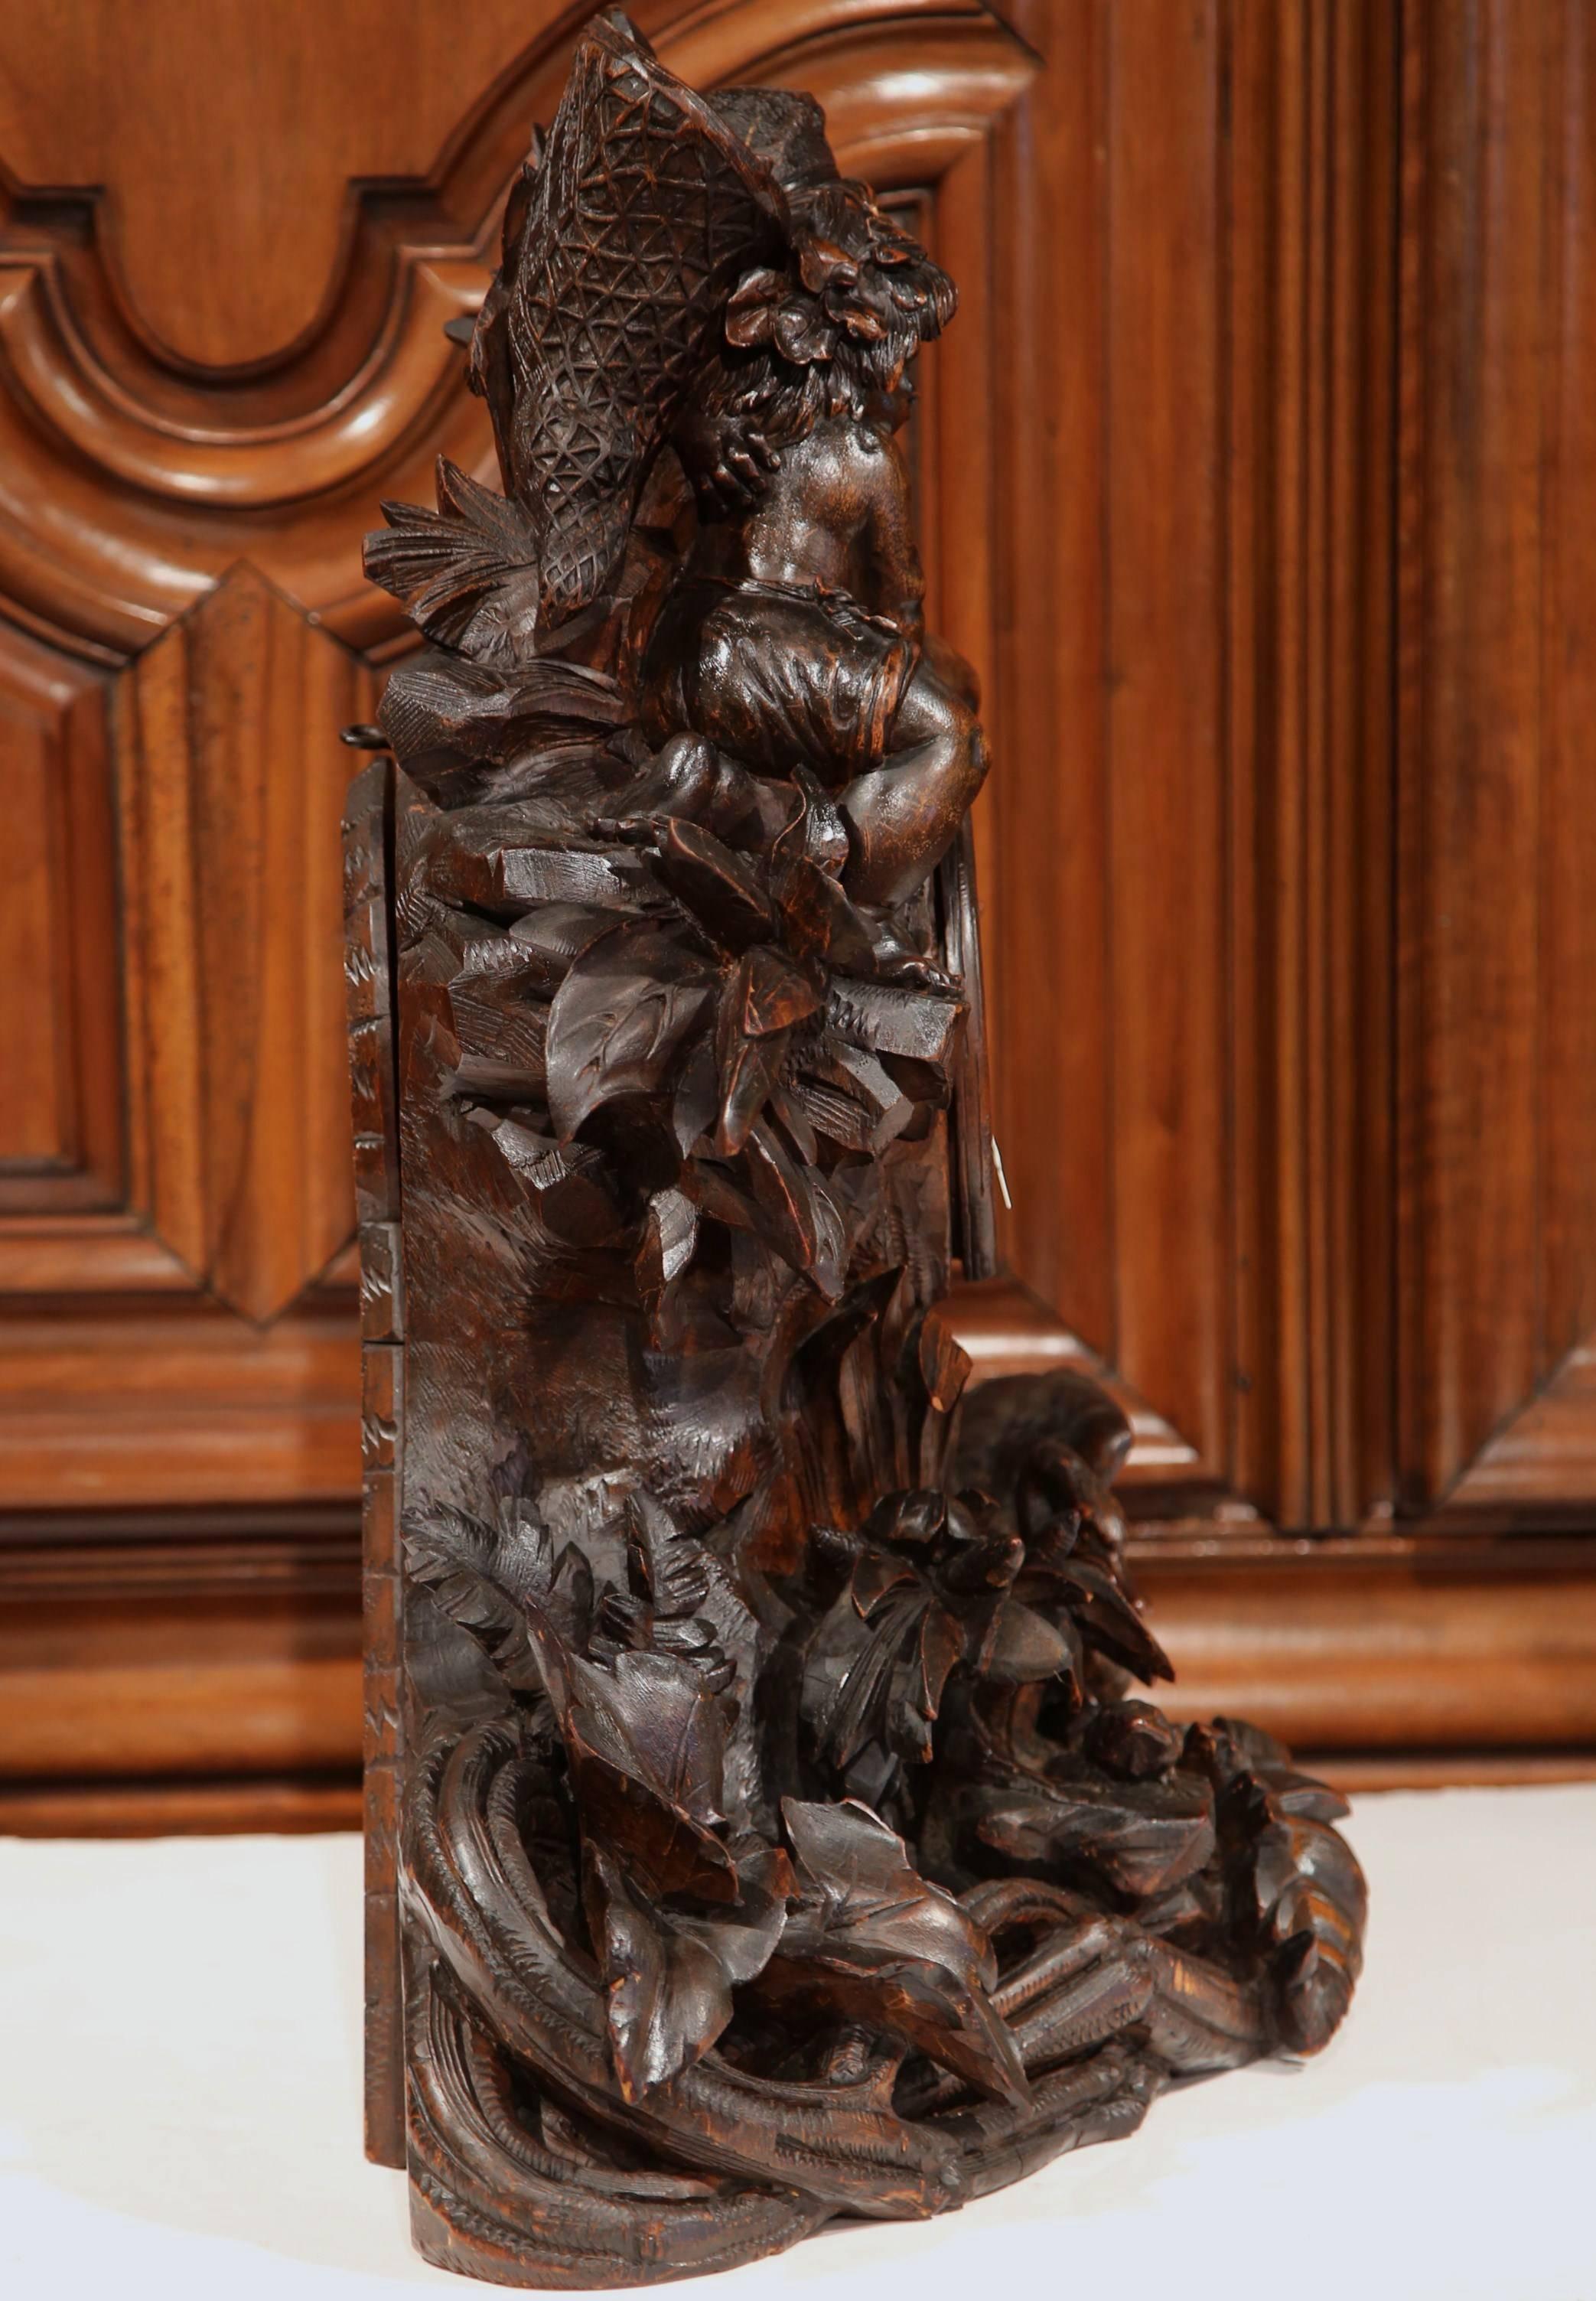 19th Century Swiss Black Forest Carved Walnut Mantel Clock with Cherubs and Bird For Sale 1